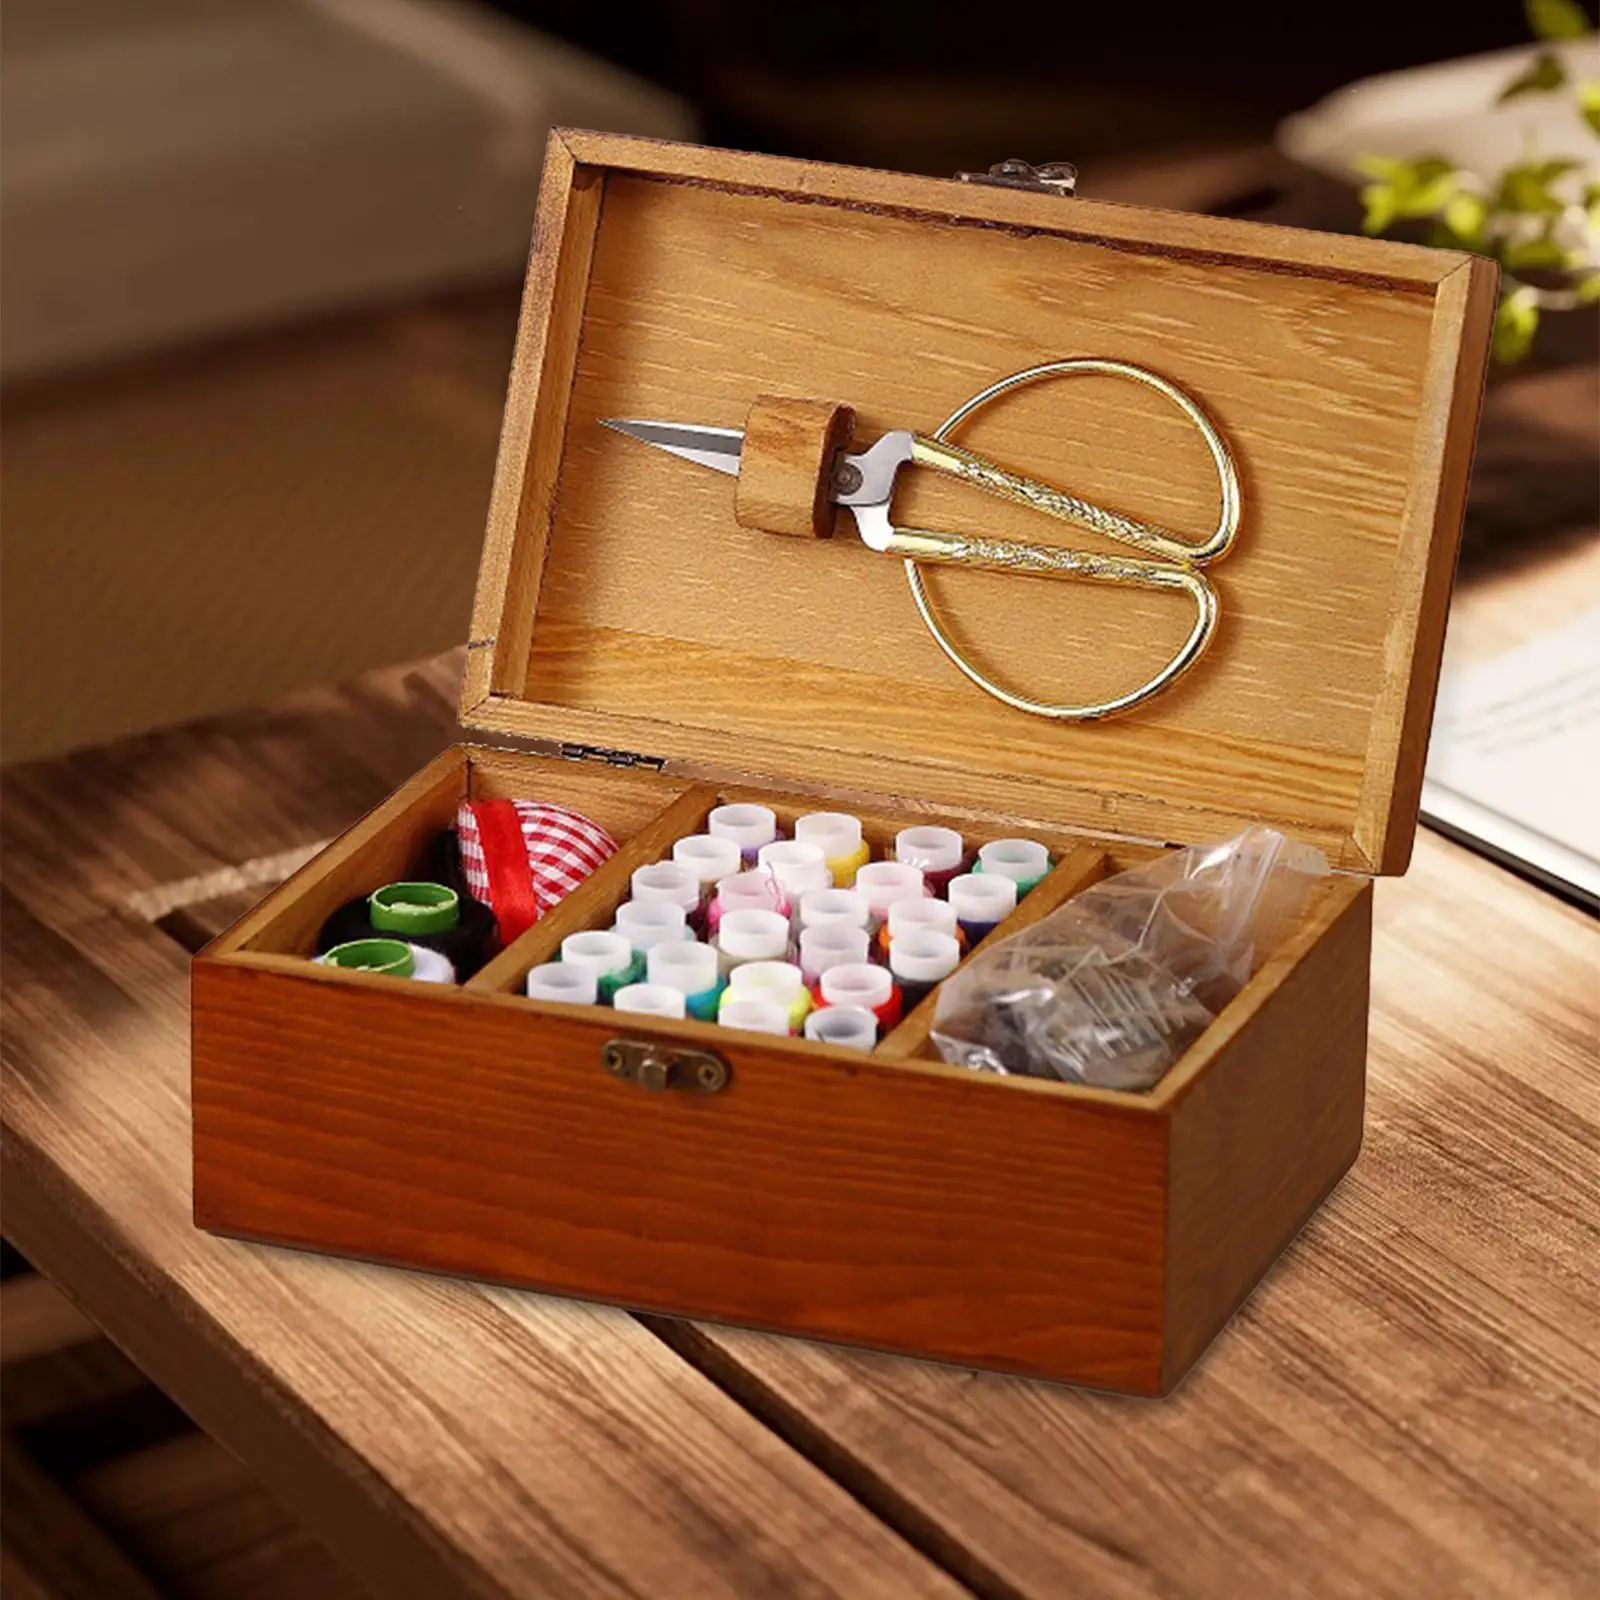 Wooden Sewing Box Empty Box Compact Embroidery Supplies Travel Multifunction Needlework Vintage Beginner Sewing Storage Basket